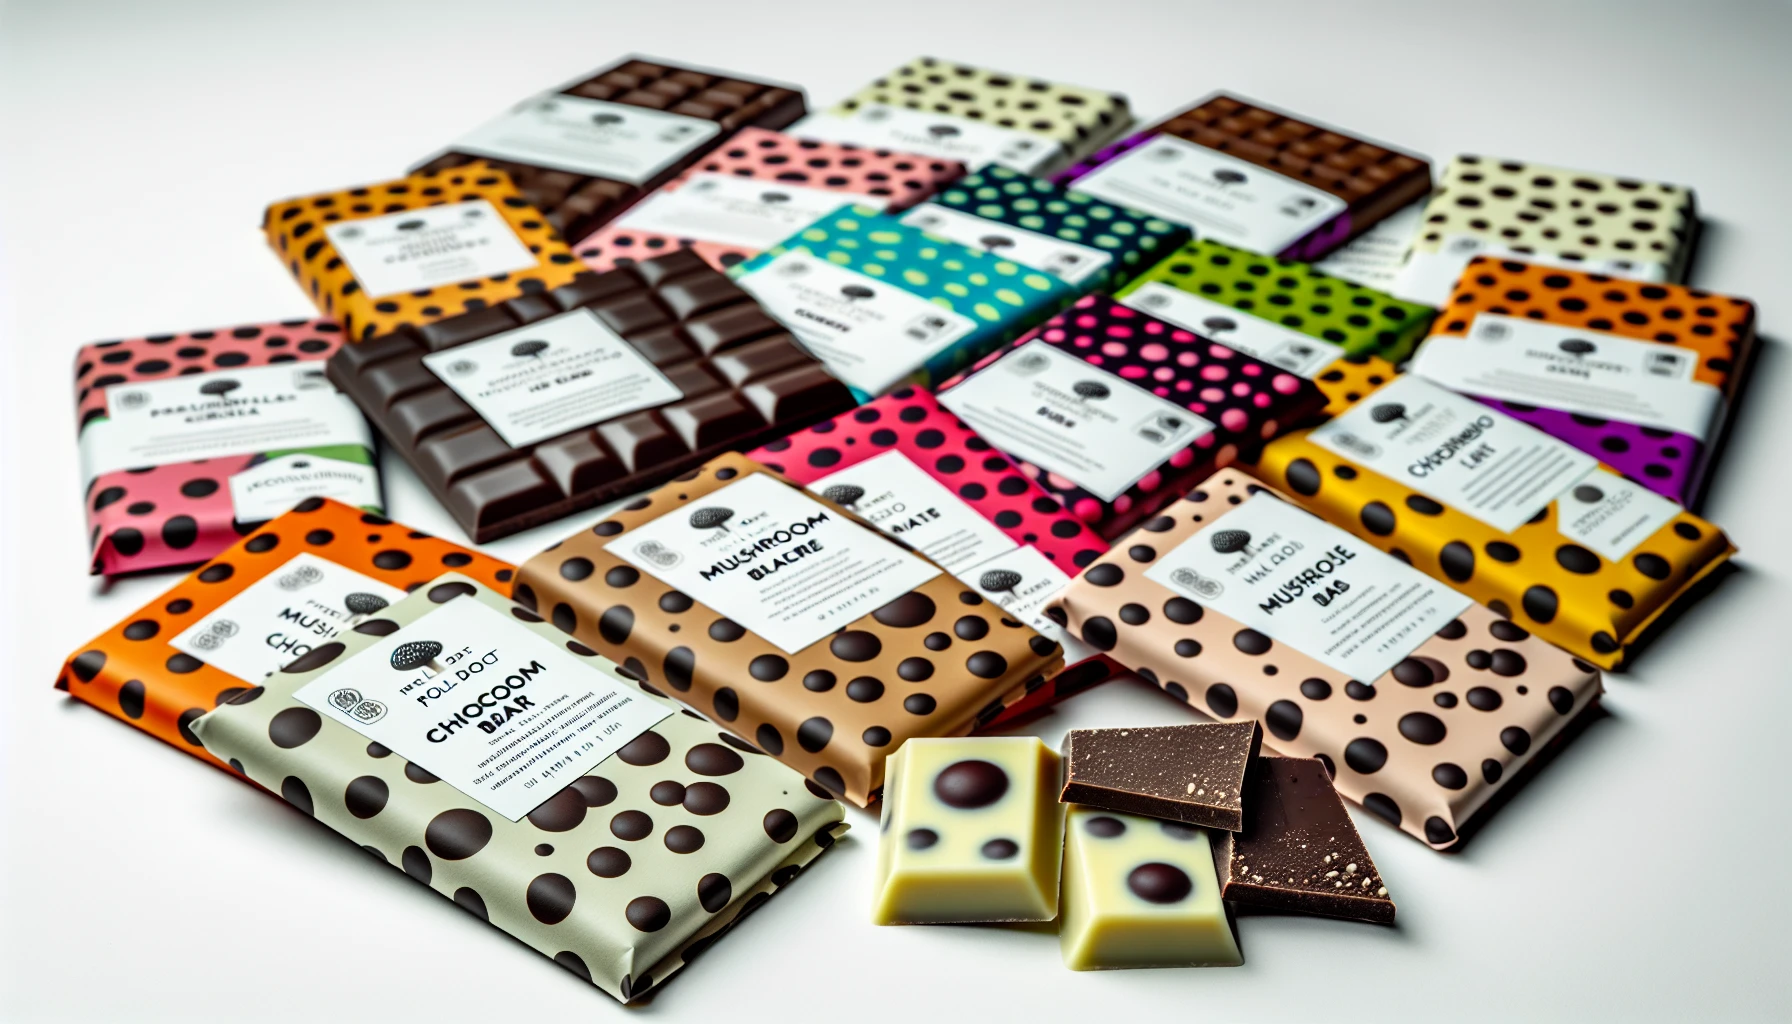 A selection of polka dot mushroom bars with diverse flavors and vibrant packaging